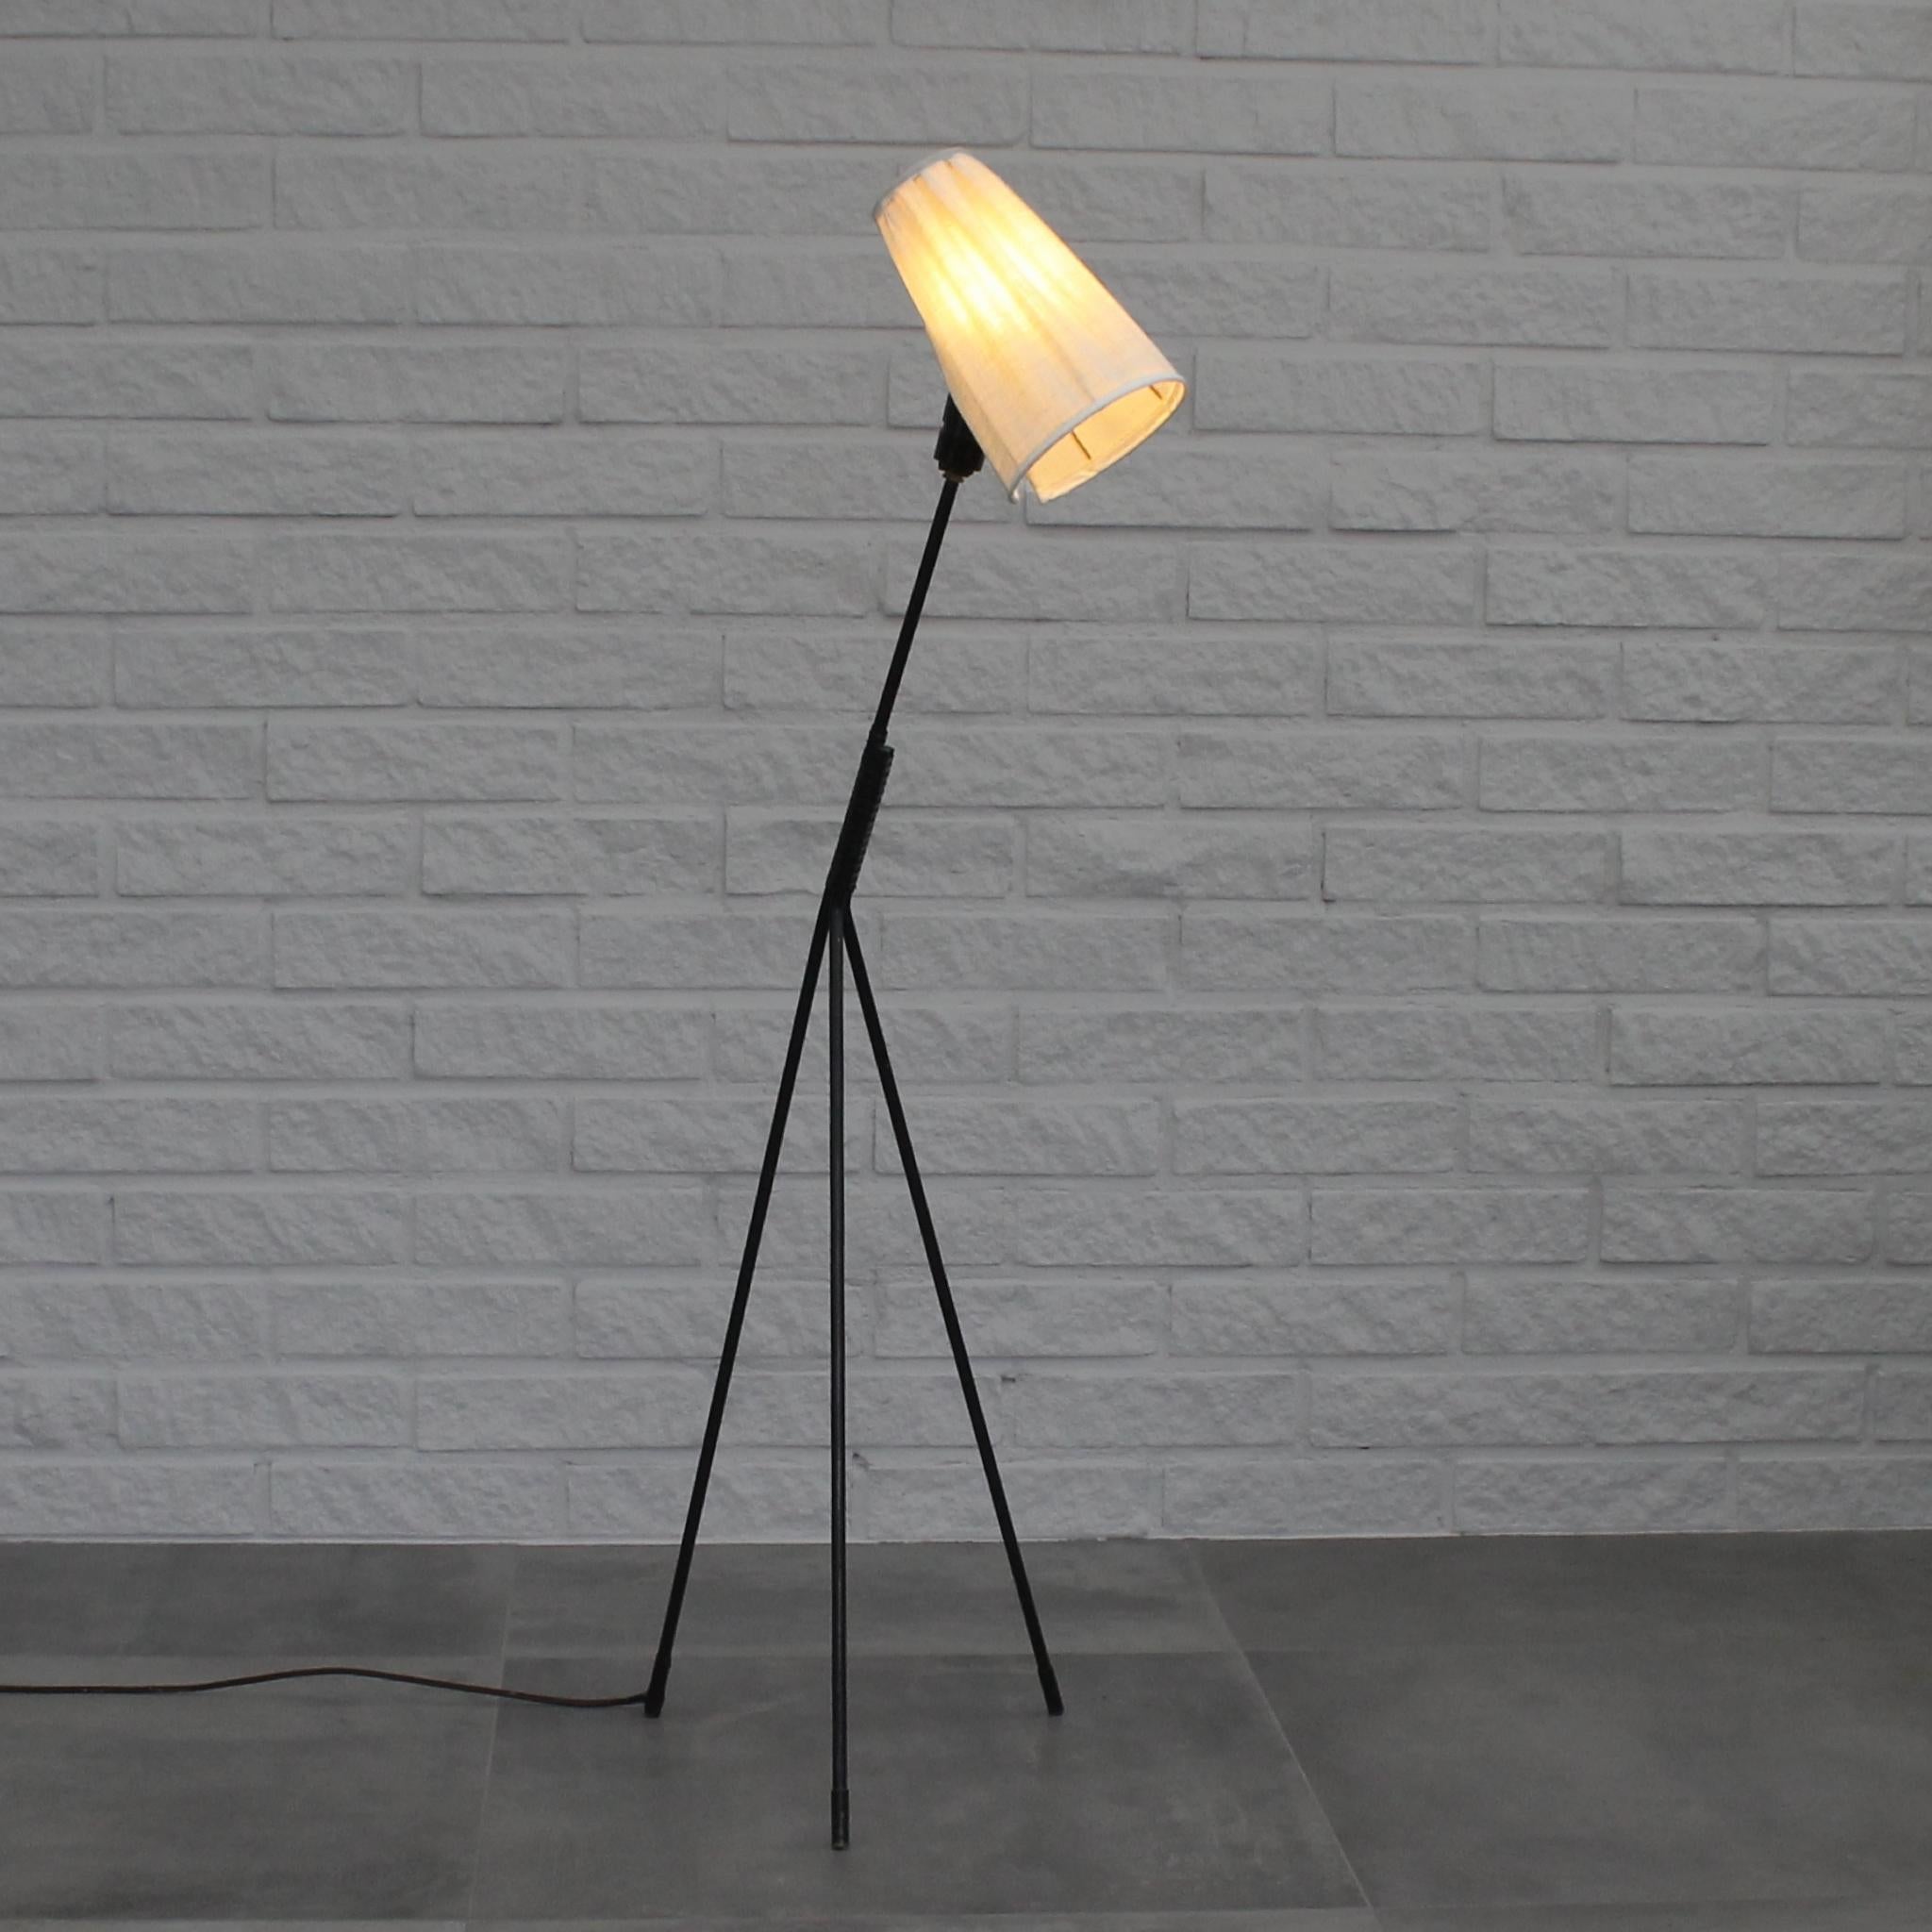 Swedish mid-century floor lamp, model 2612, designed by Eje Ahlgren for LUCO Armaturfabrik in Gothenburg. It features a tripod frame made from steel, partially adorned with a plastic stripe. The lamp shade is adjustable and covered in off-white